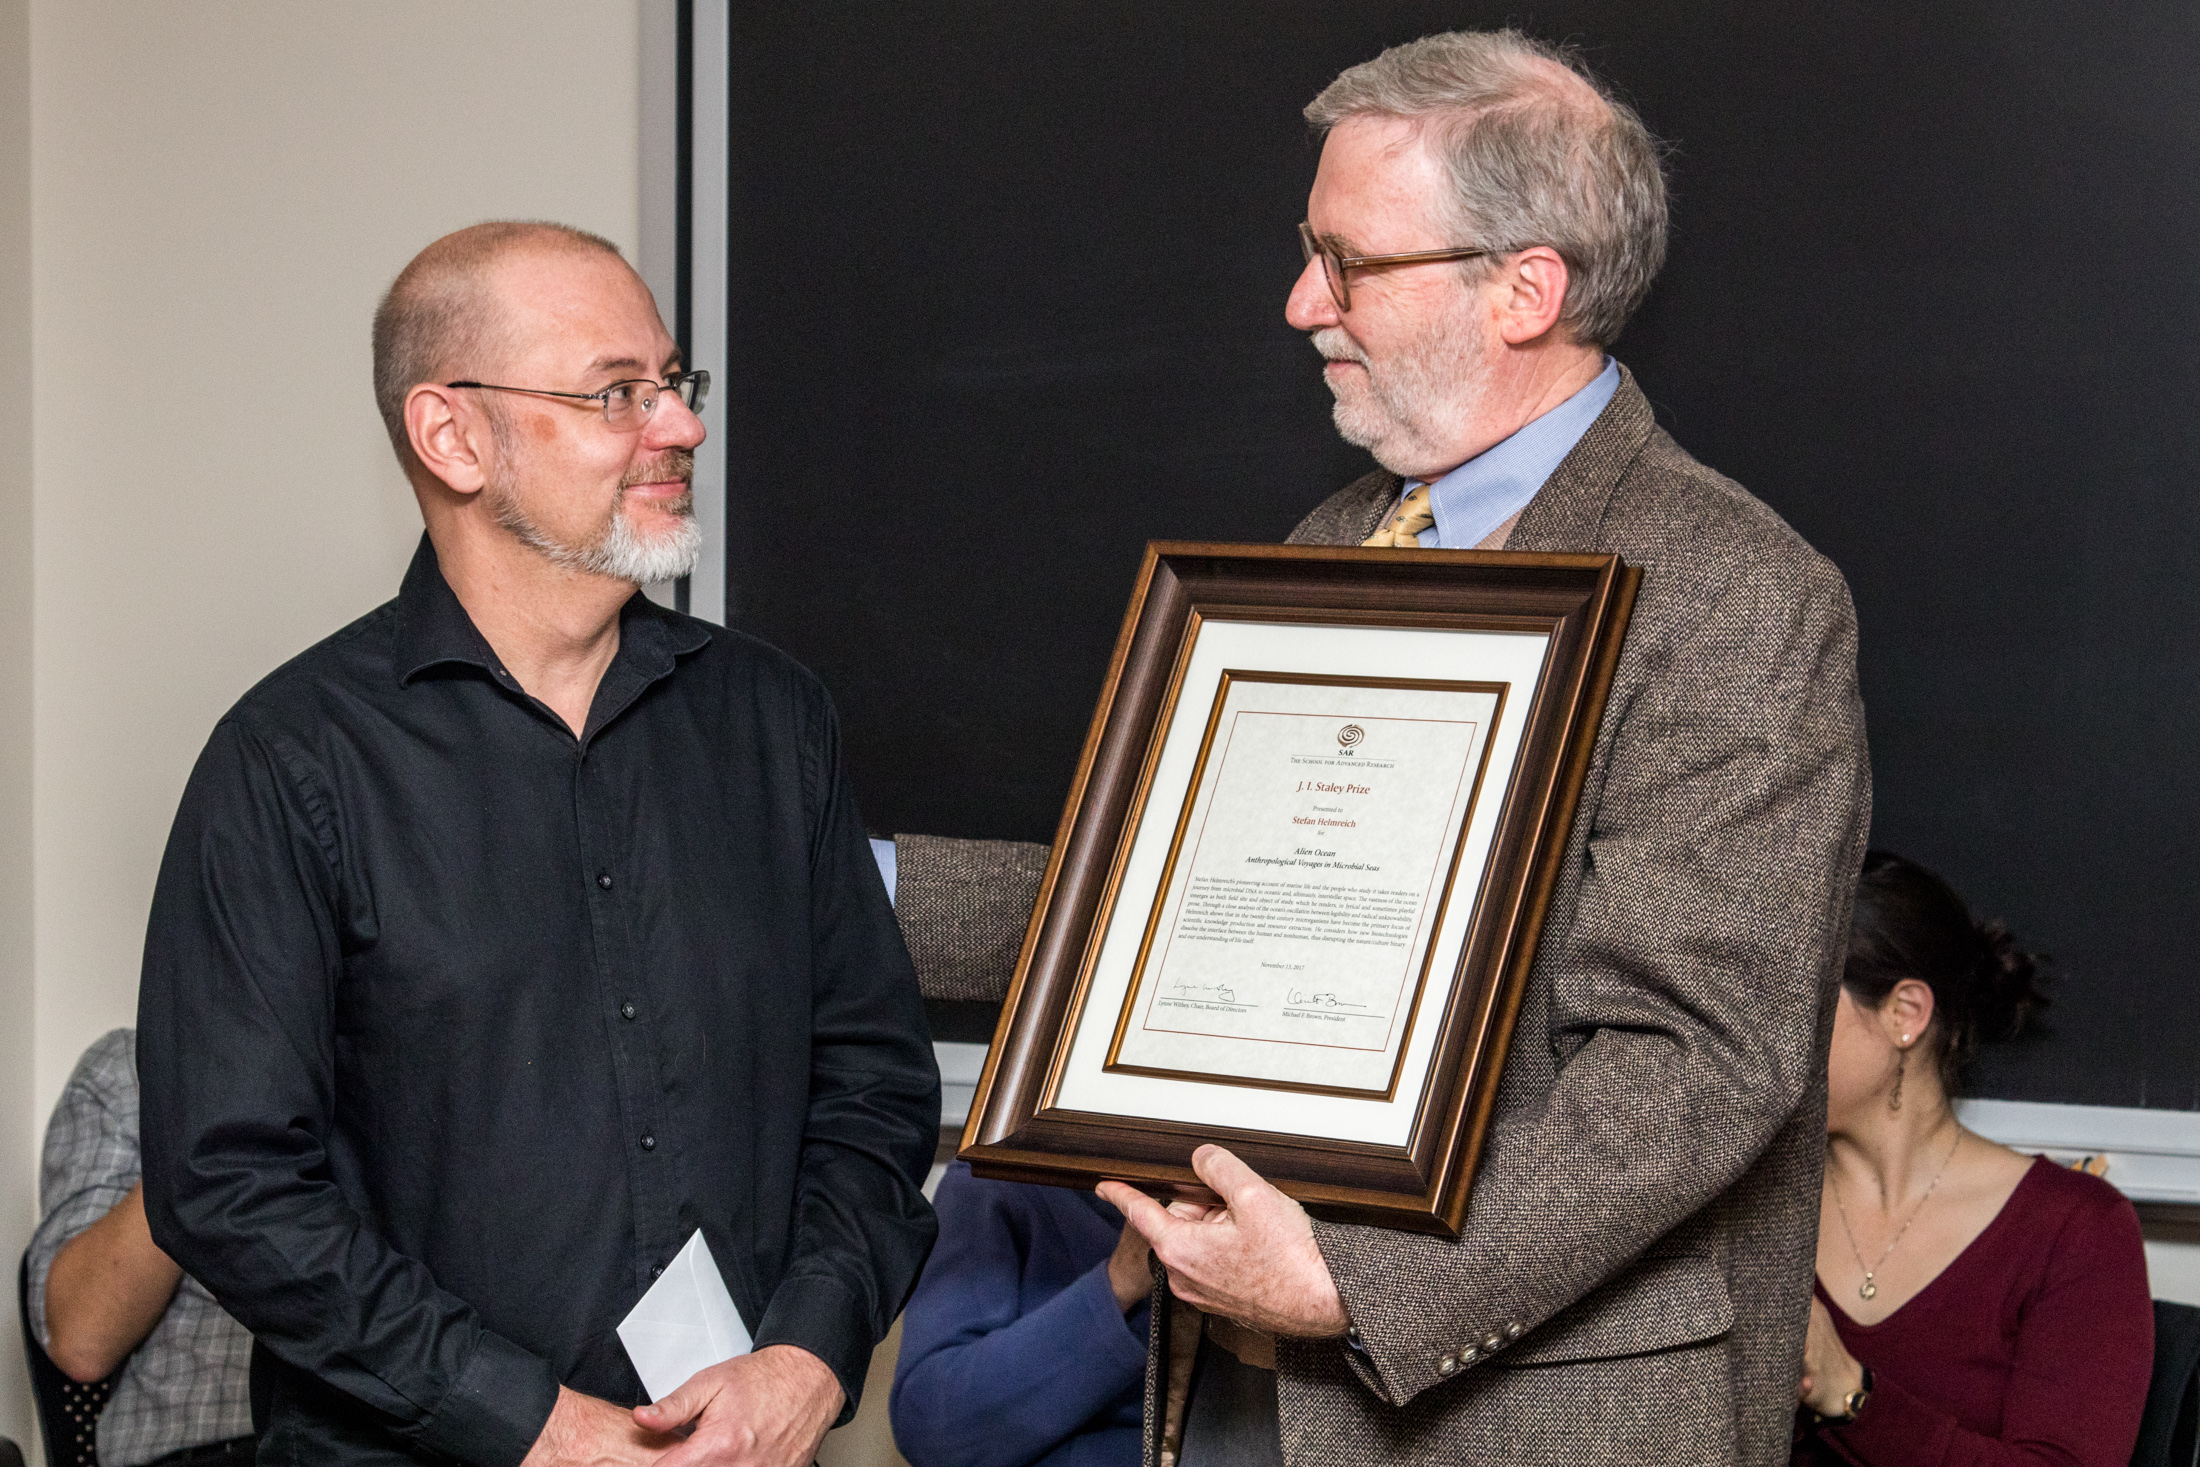 Ceremony Honoring 2017 J.I. Staley Prize Held at MIT